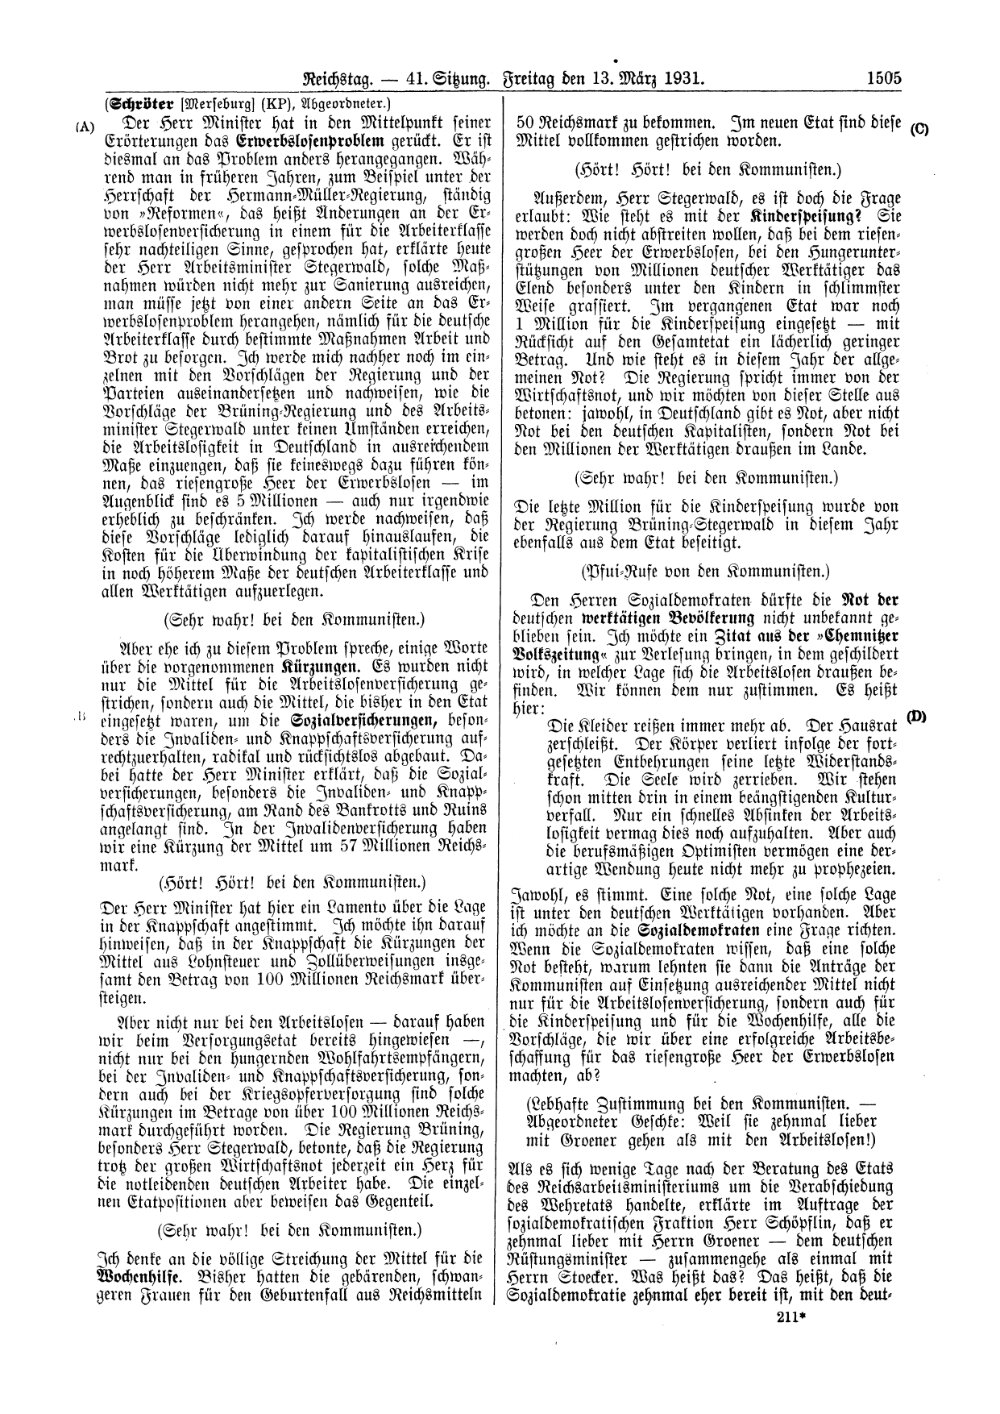 Scan of page 1505